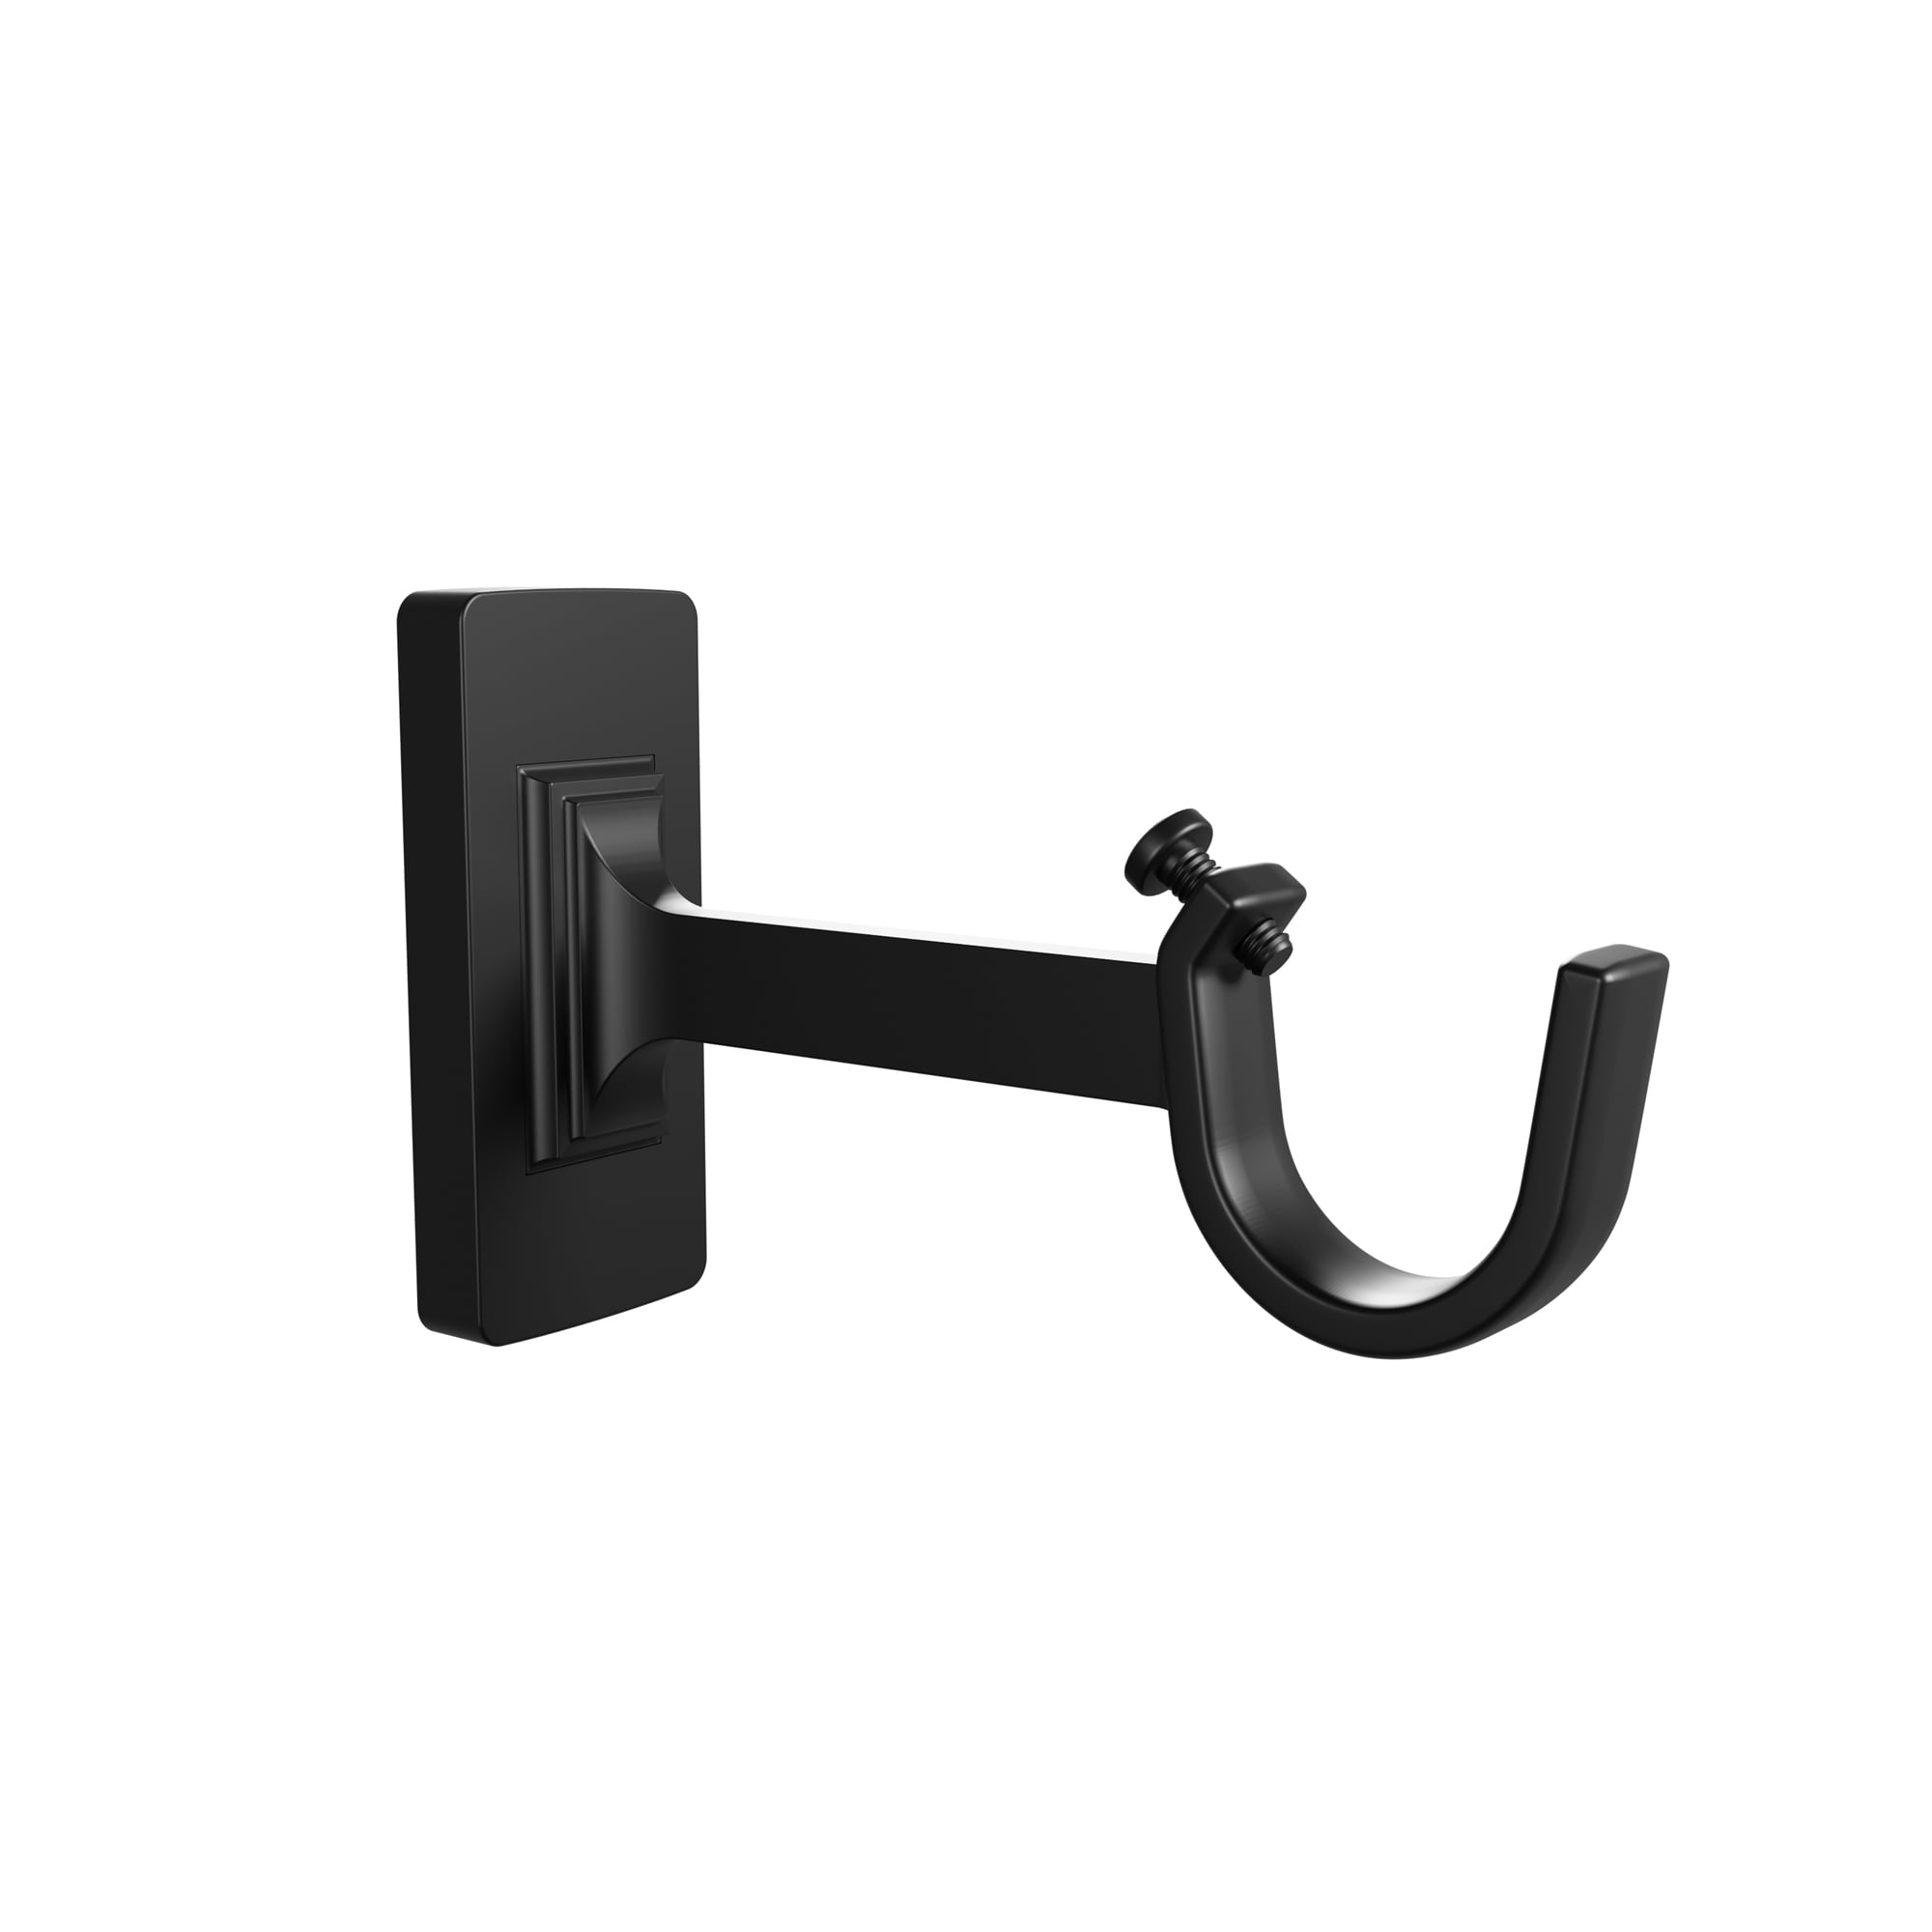 Shop Wooden Curtain Rod Hook And Bracket with great discounts and